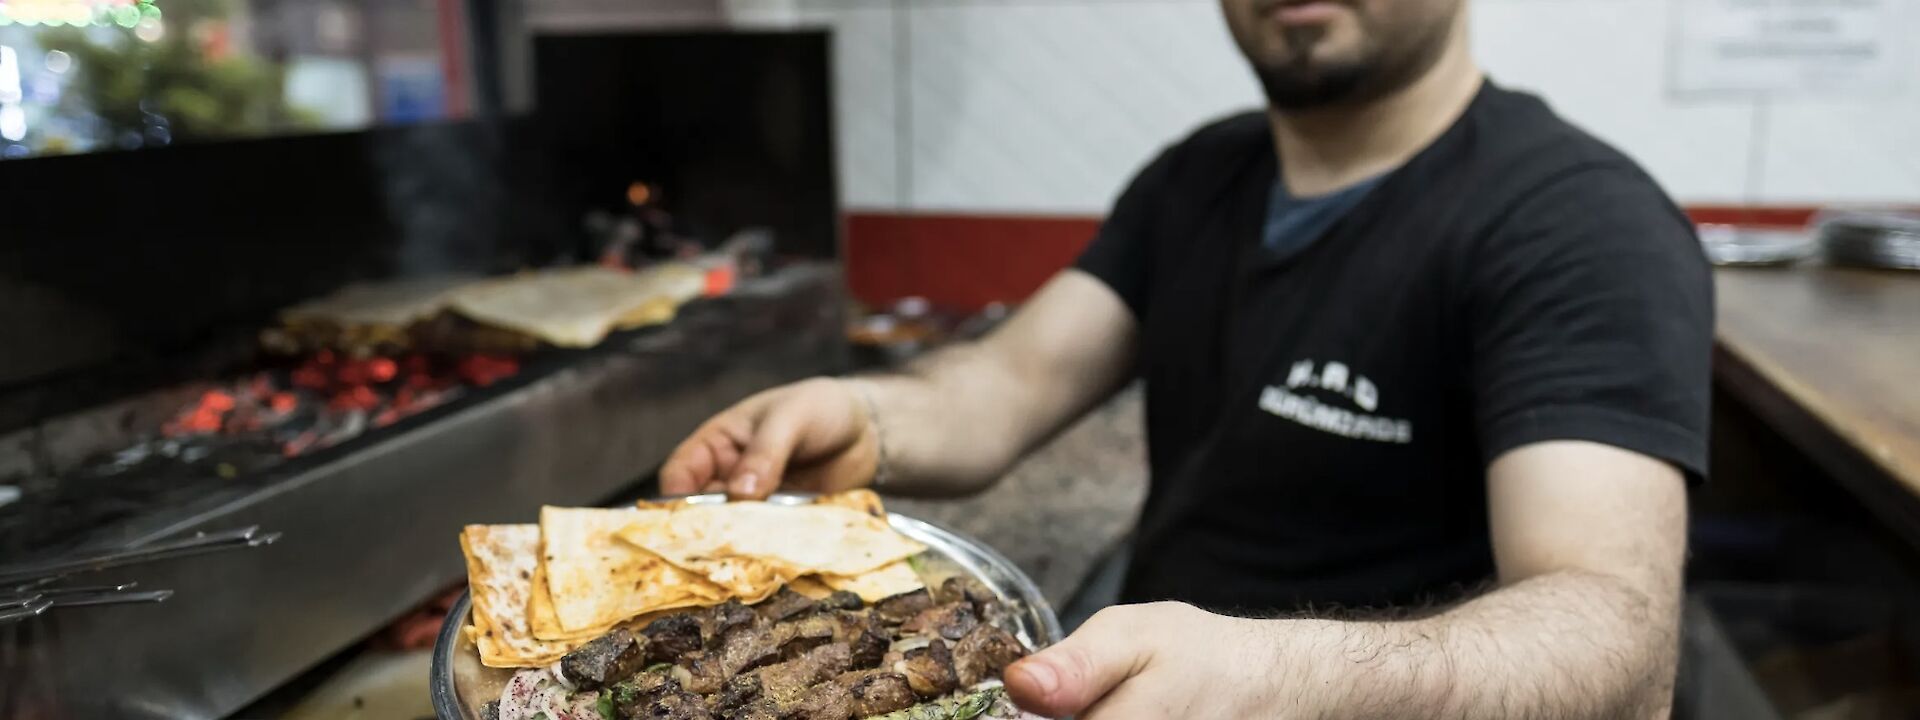 Serving up street food, Istanbul.